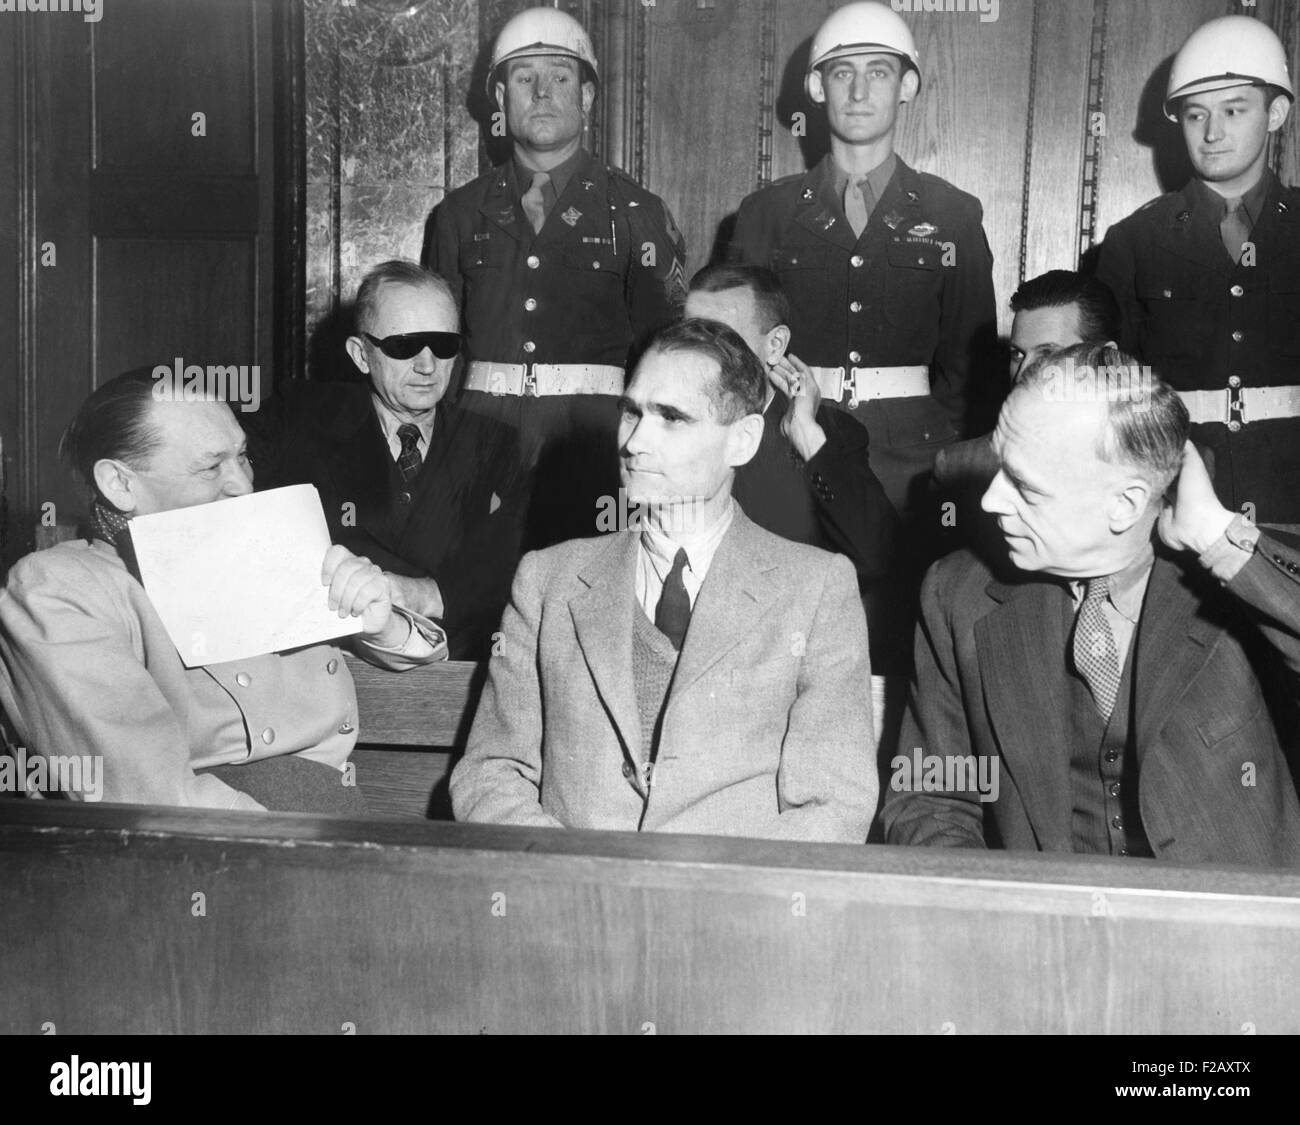 Nazi defendants under guard in the dock at Nuremberg War Crimes Trial, Feb. 5, 1946. L-R: Herman Goering covers his grin with a Stock Photo